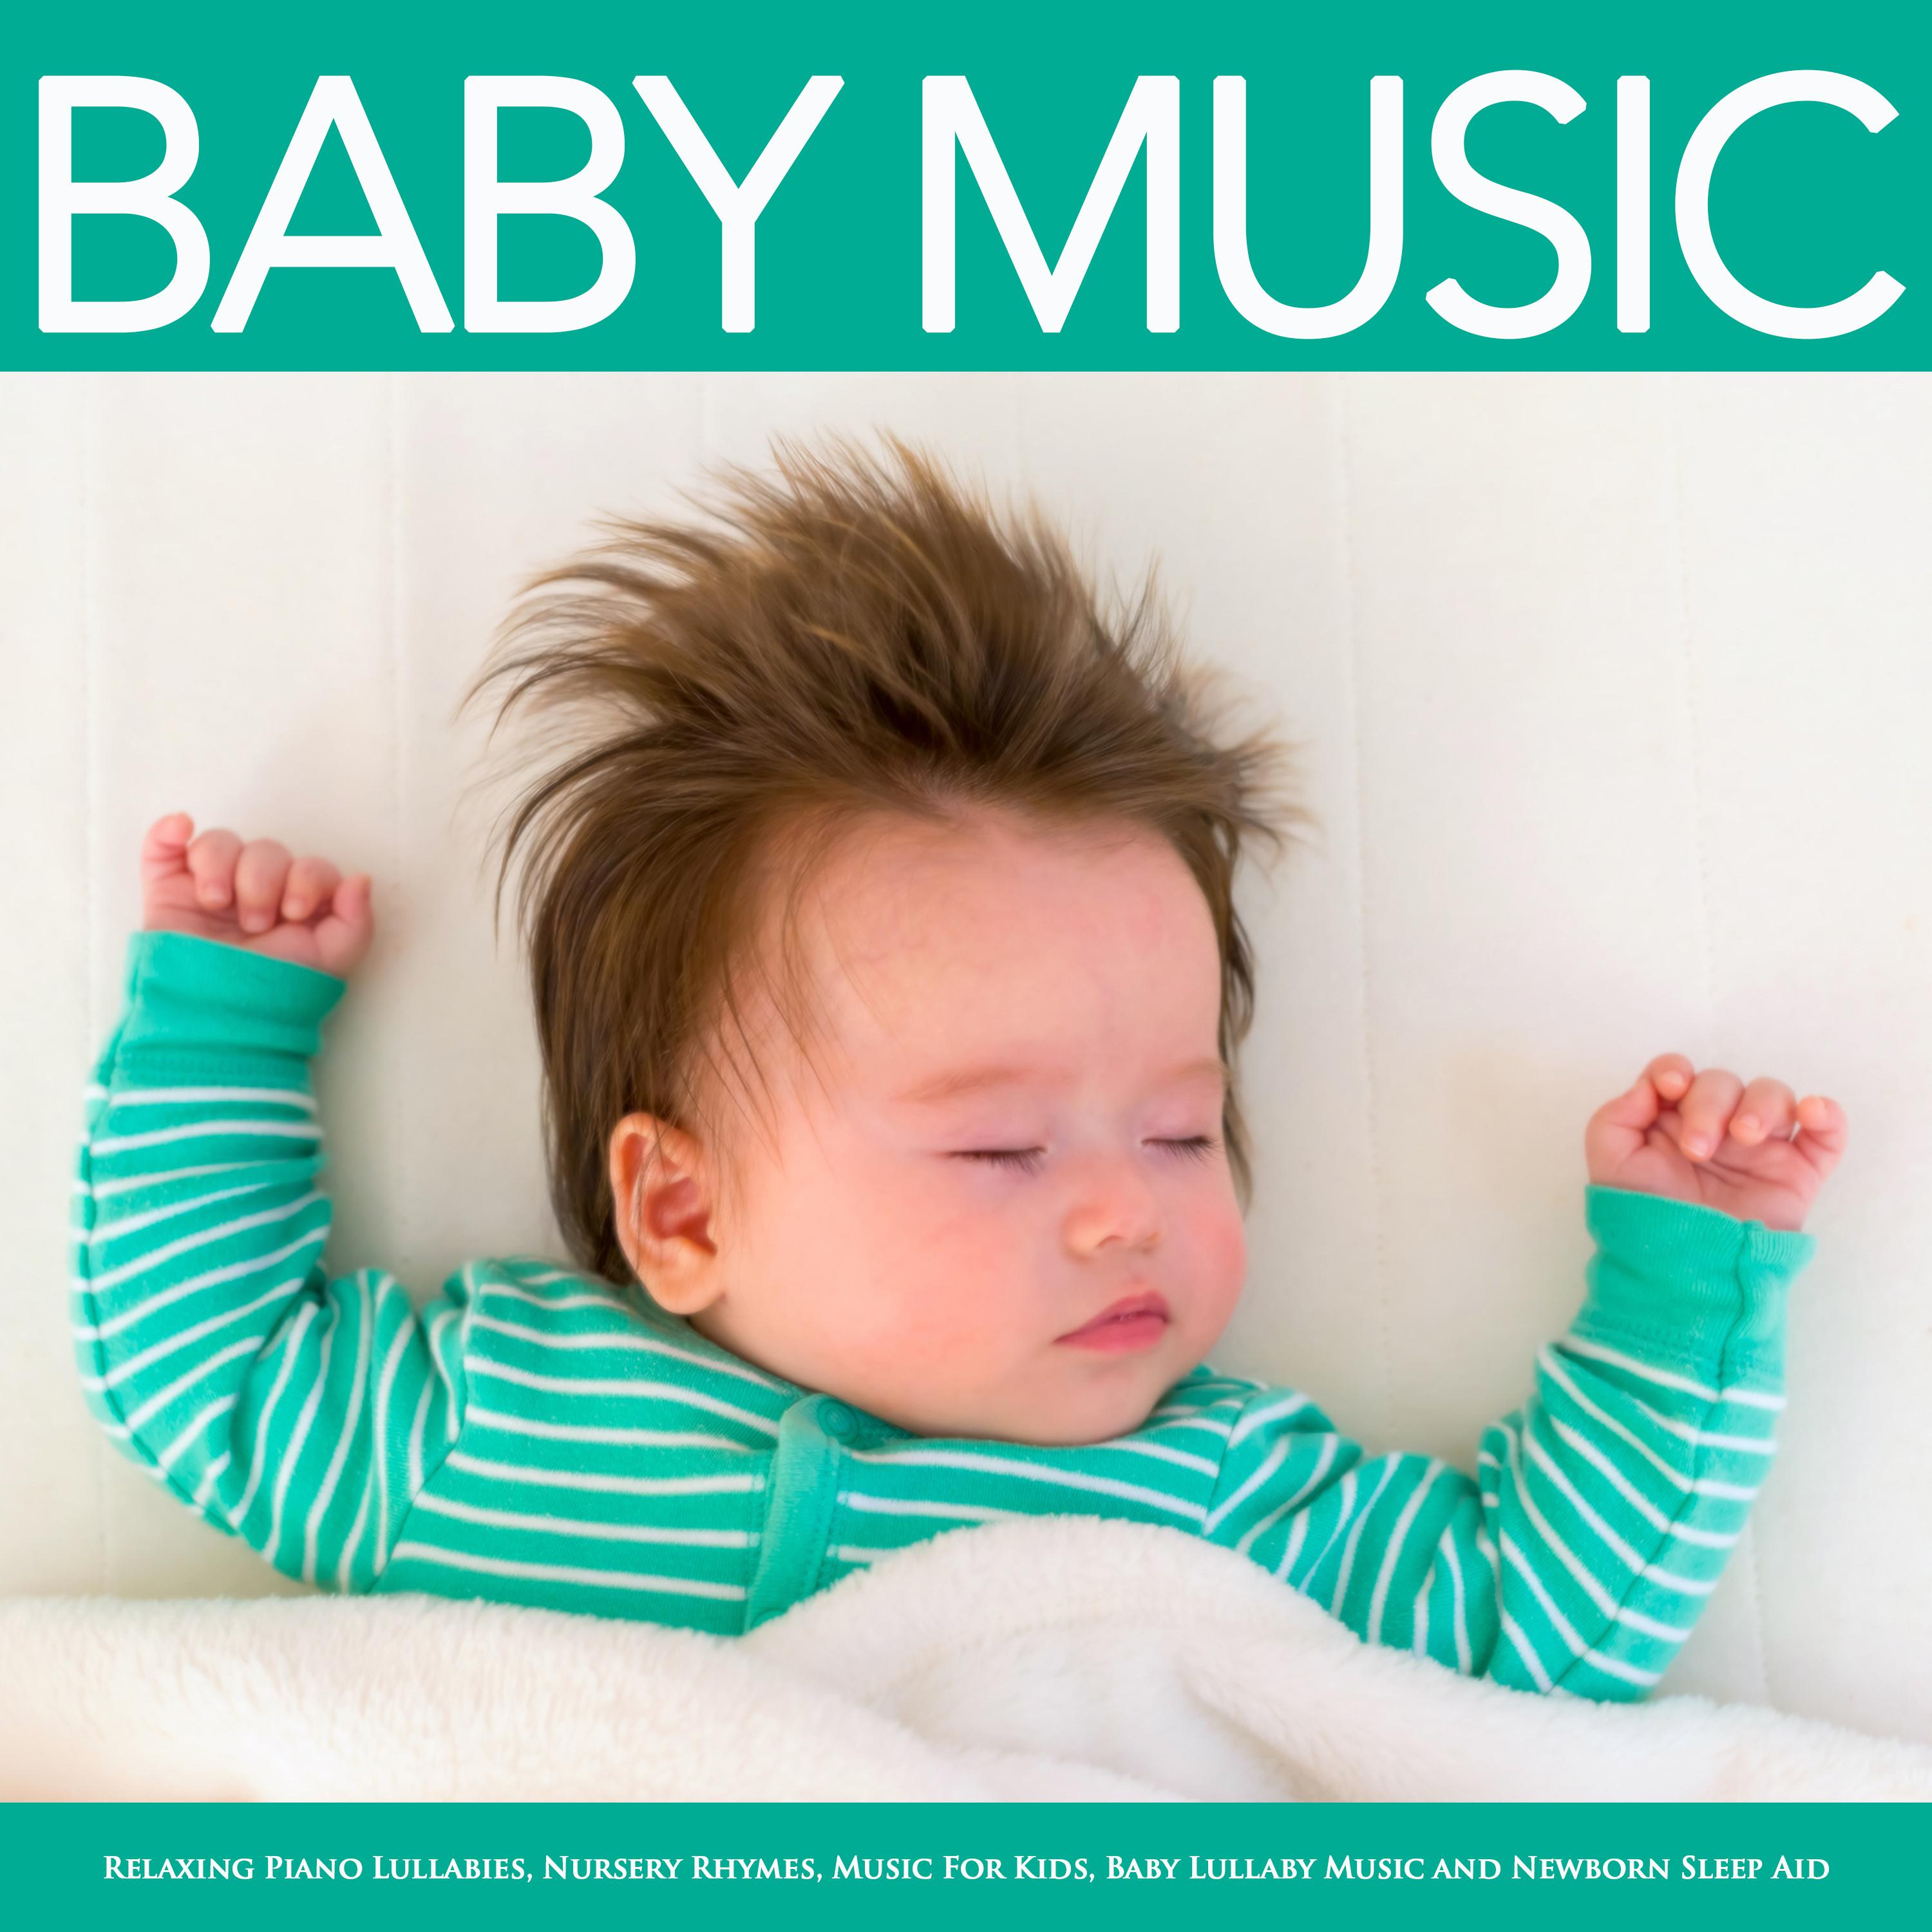 Baby Music: Relaxing Piano Lullabies, Nursery Rhymes, Music For Kids, Baby Lullaby Music and Newborn Sleep Aid